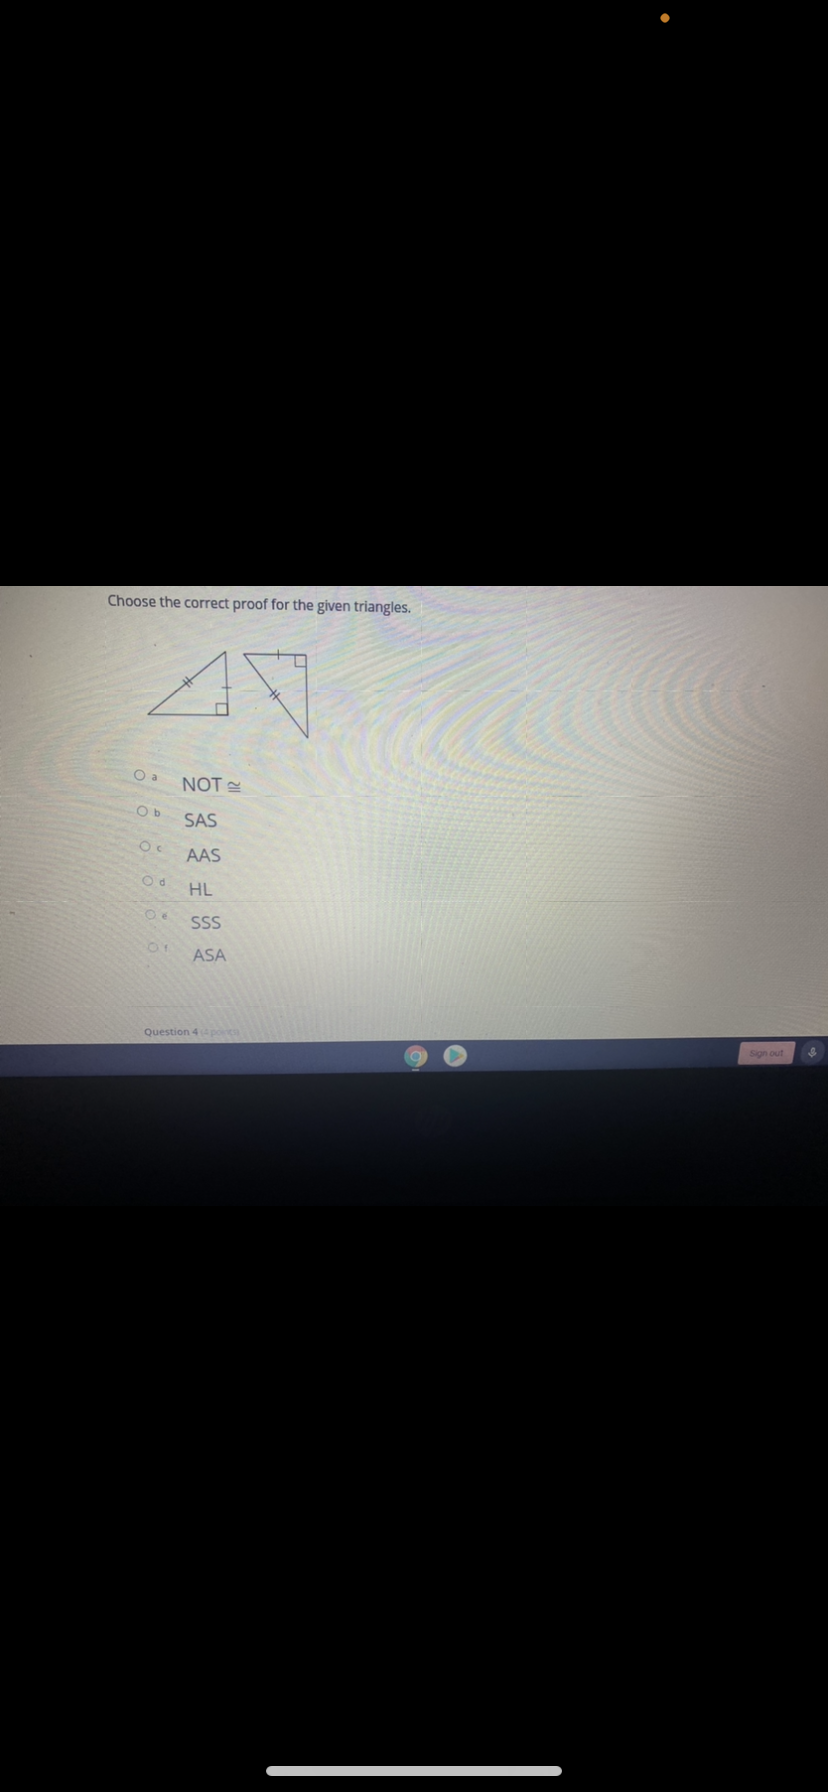 Choose the correct proof for the given triangles.
O a
NOT
SAS
AAS
HL
SS
ASA
Question 4 poc
Sign out
